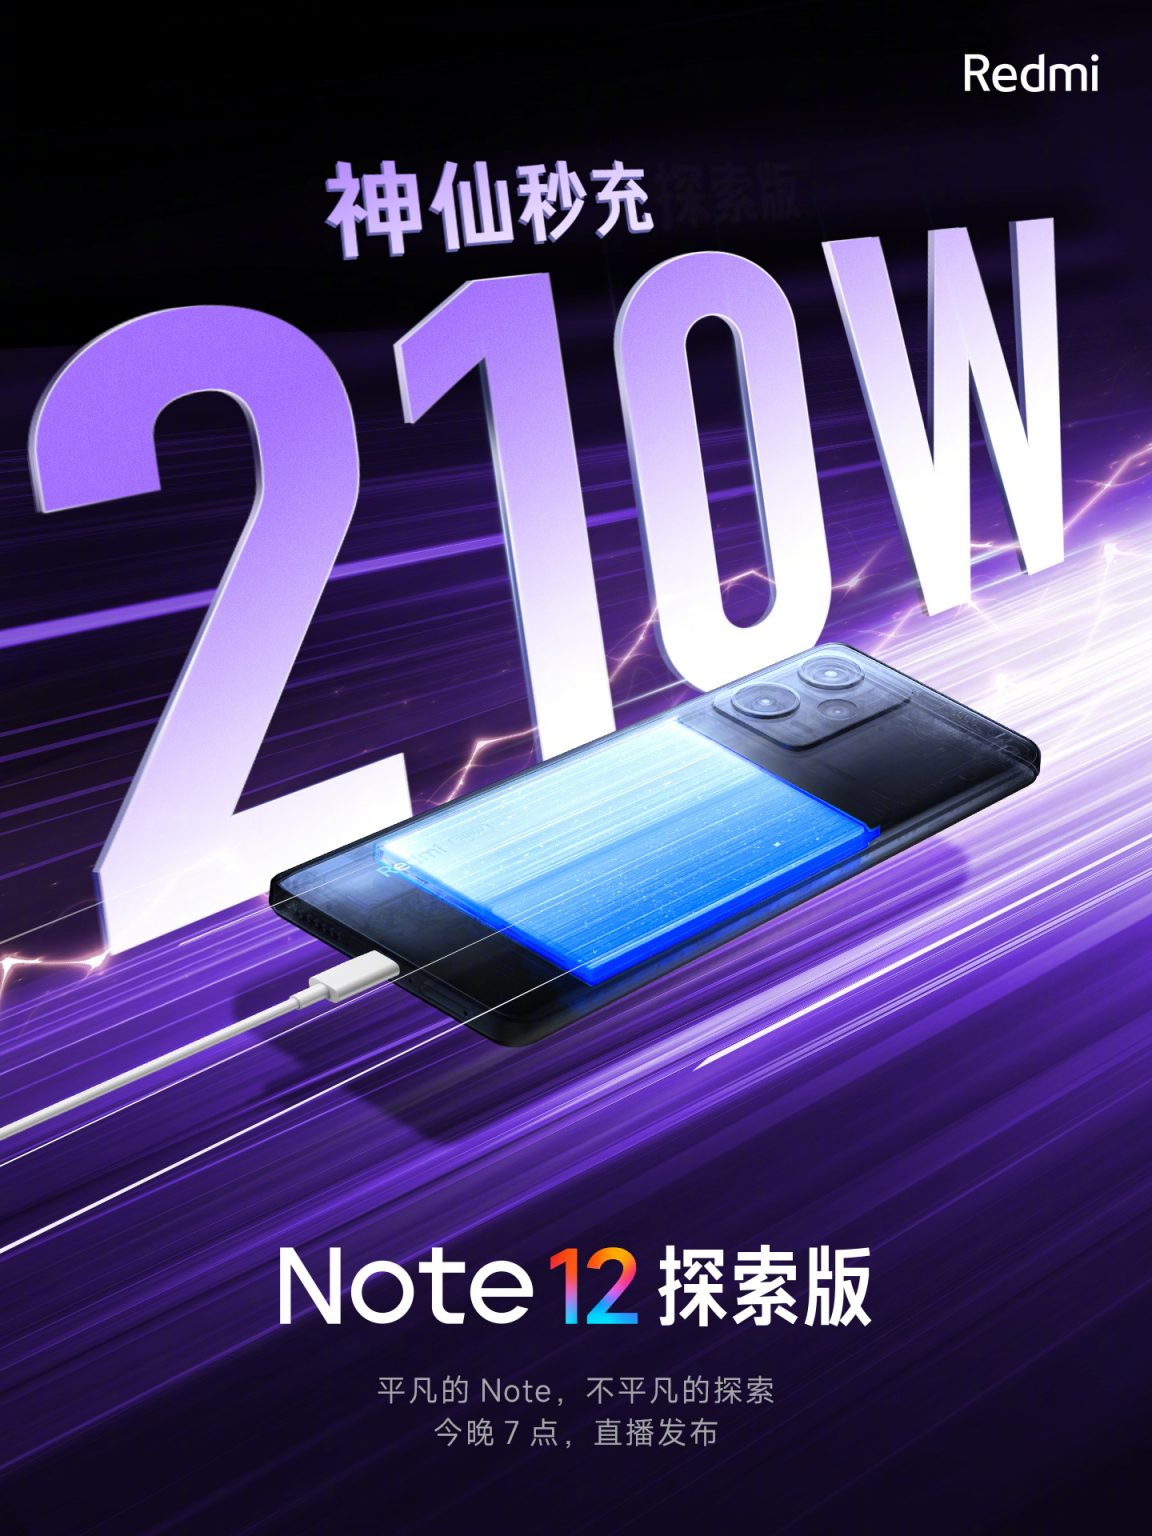 Redmi Note 12 Explorer supports 210W charging, world’s fastest charging